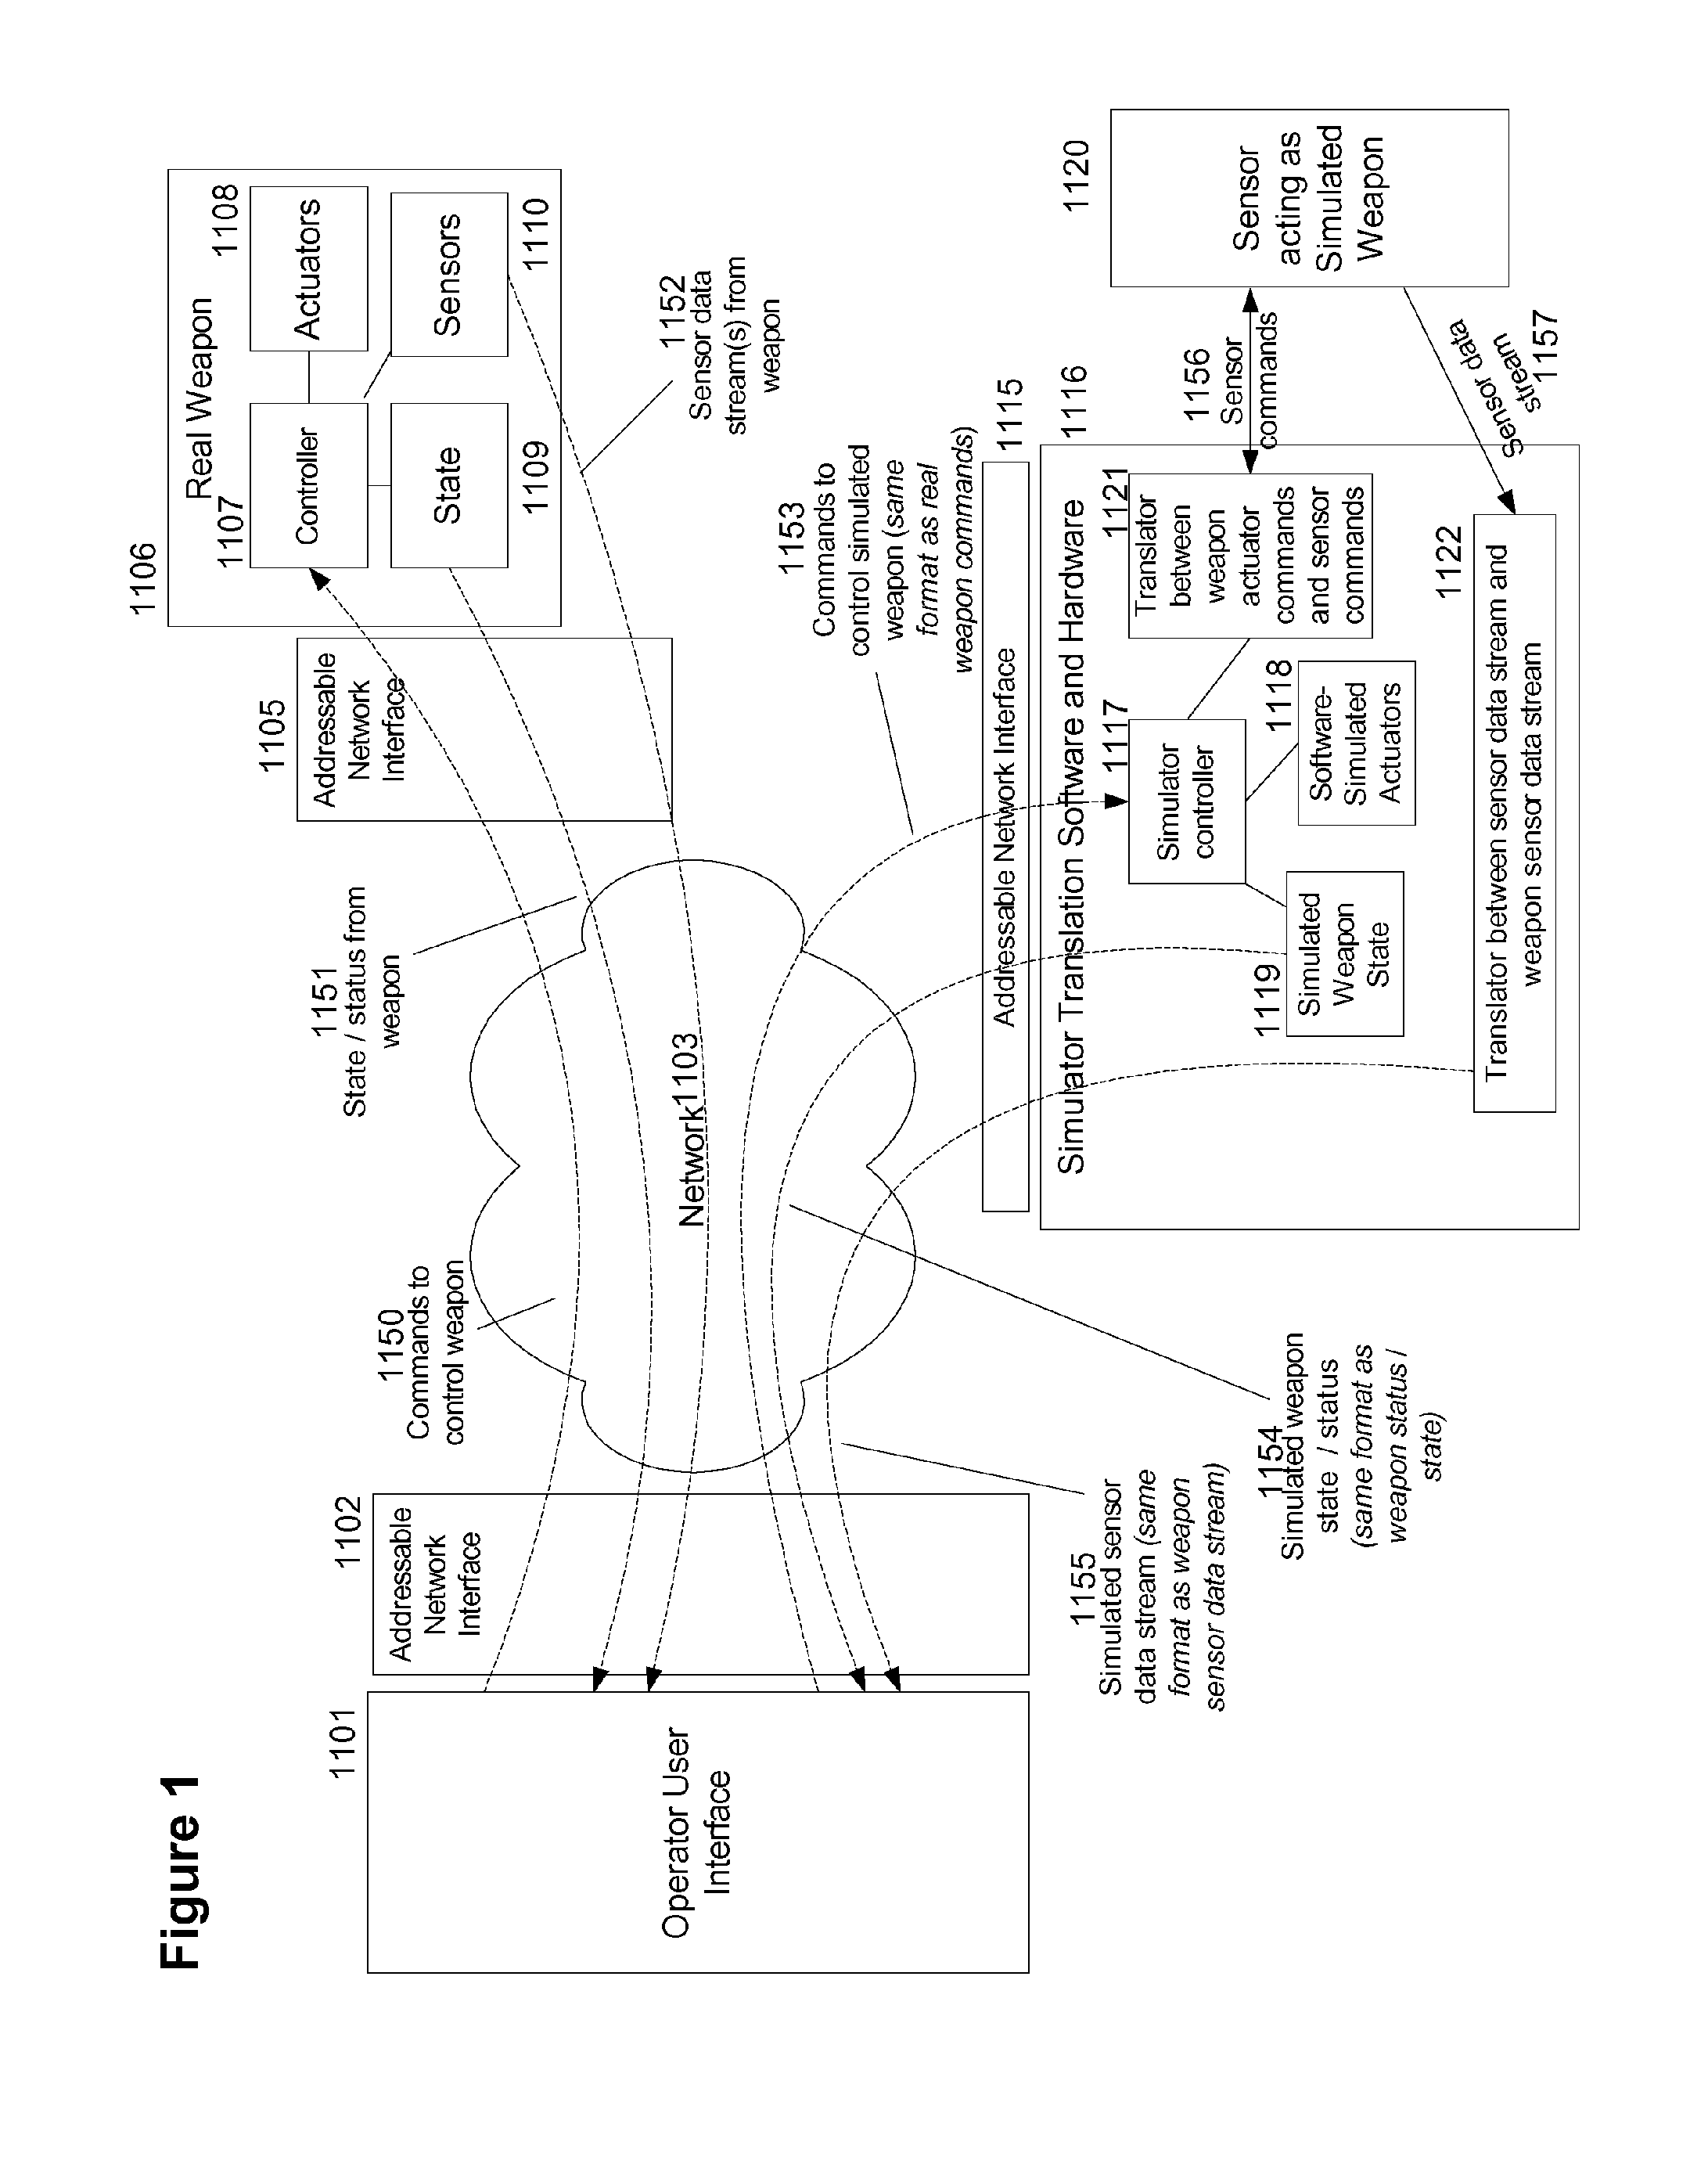 Video surveillance system and method